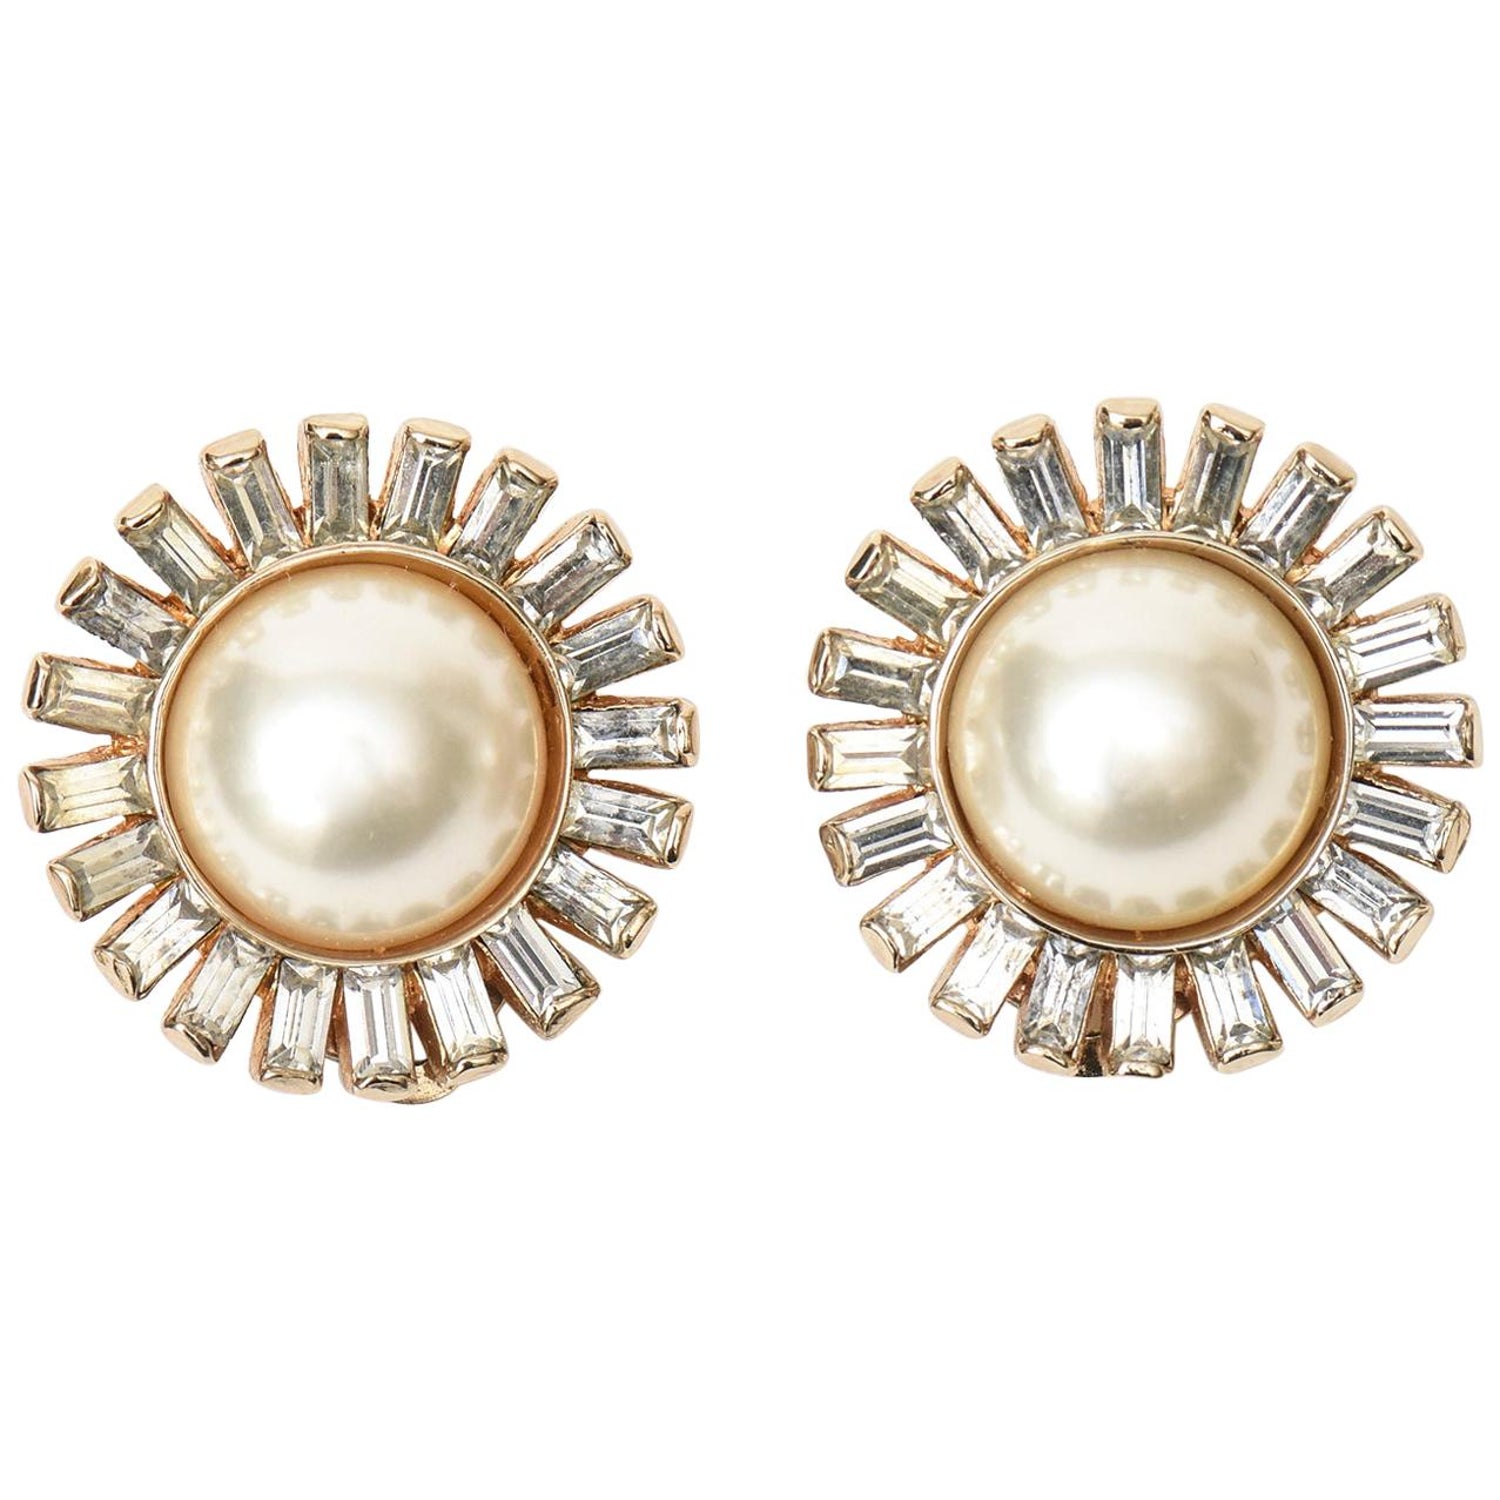 Vintage gold clip on earrings with faux pearls